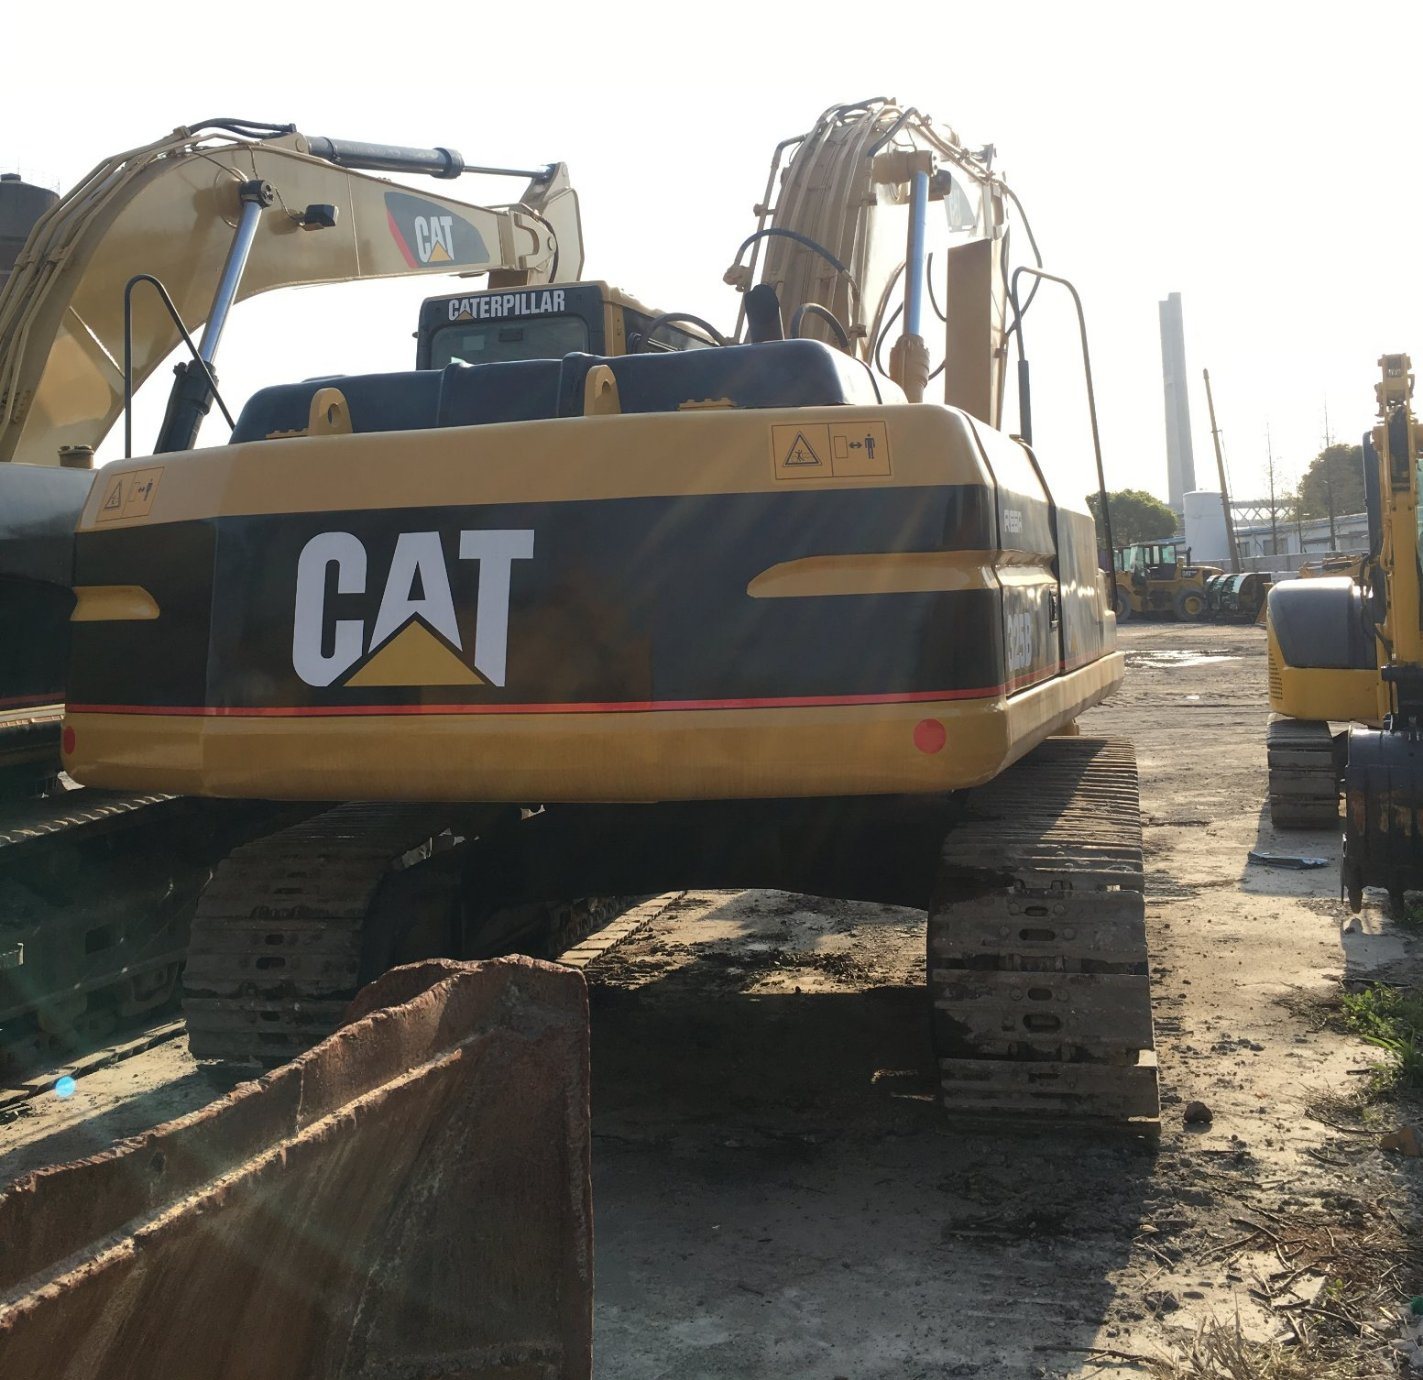 Used Caterpillar 325b Excavator in Good Working Condition with AC